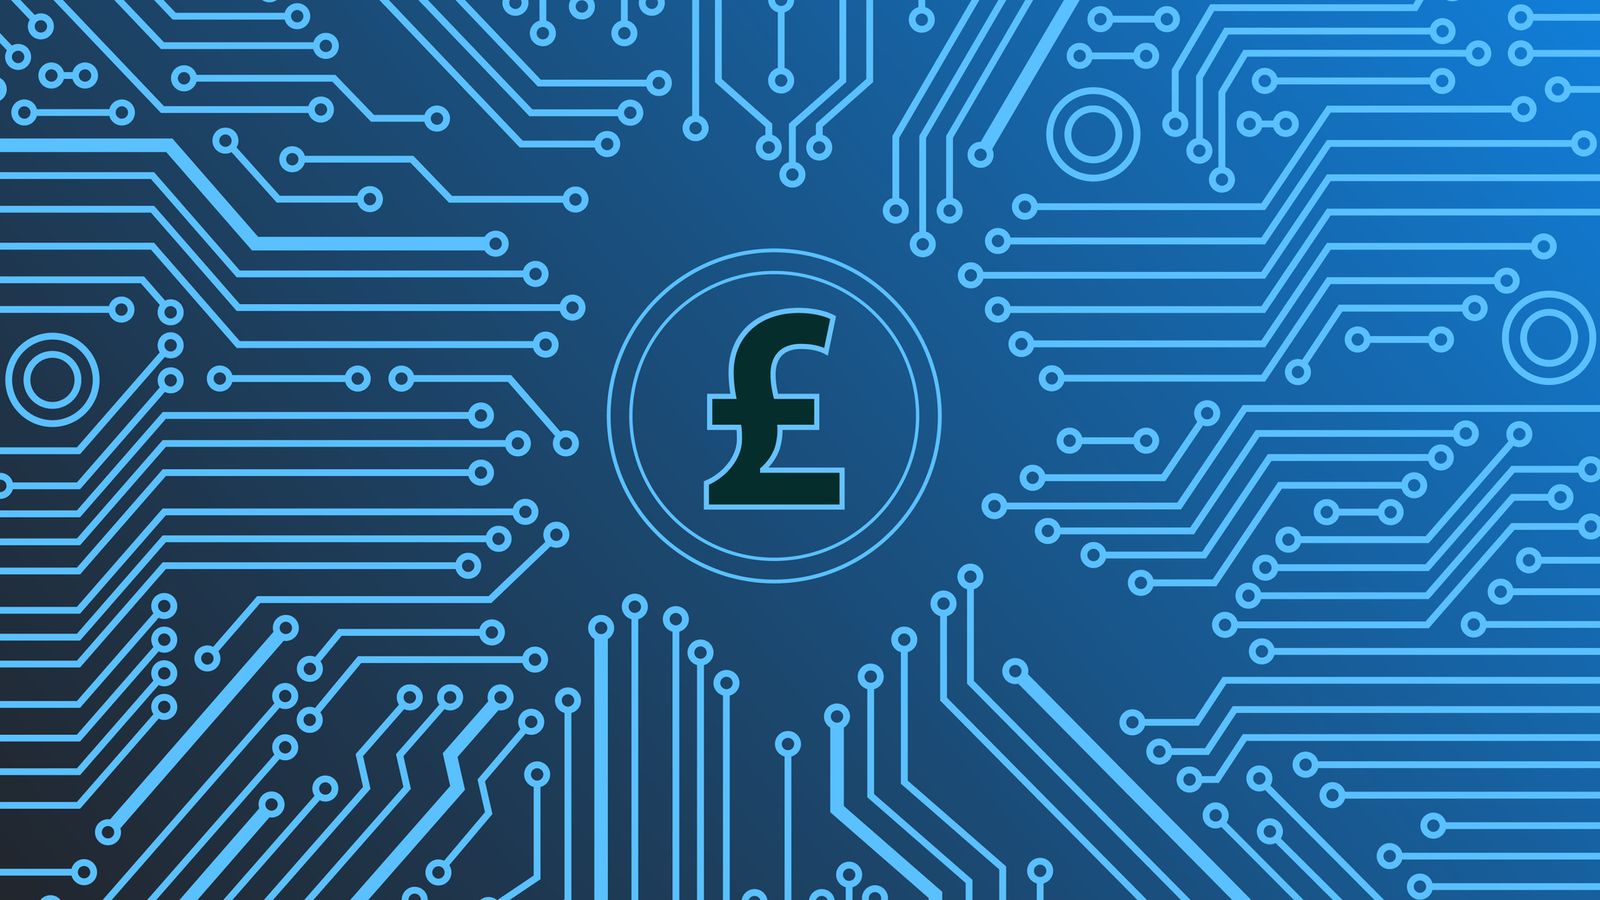 Britcoin: Future of a digital pound 'more likely than not', Bank of England official says